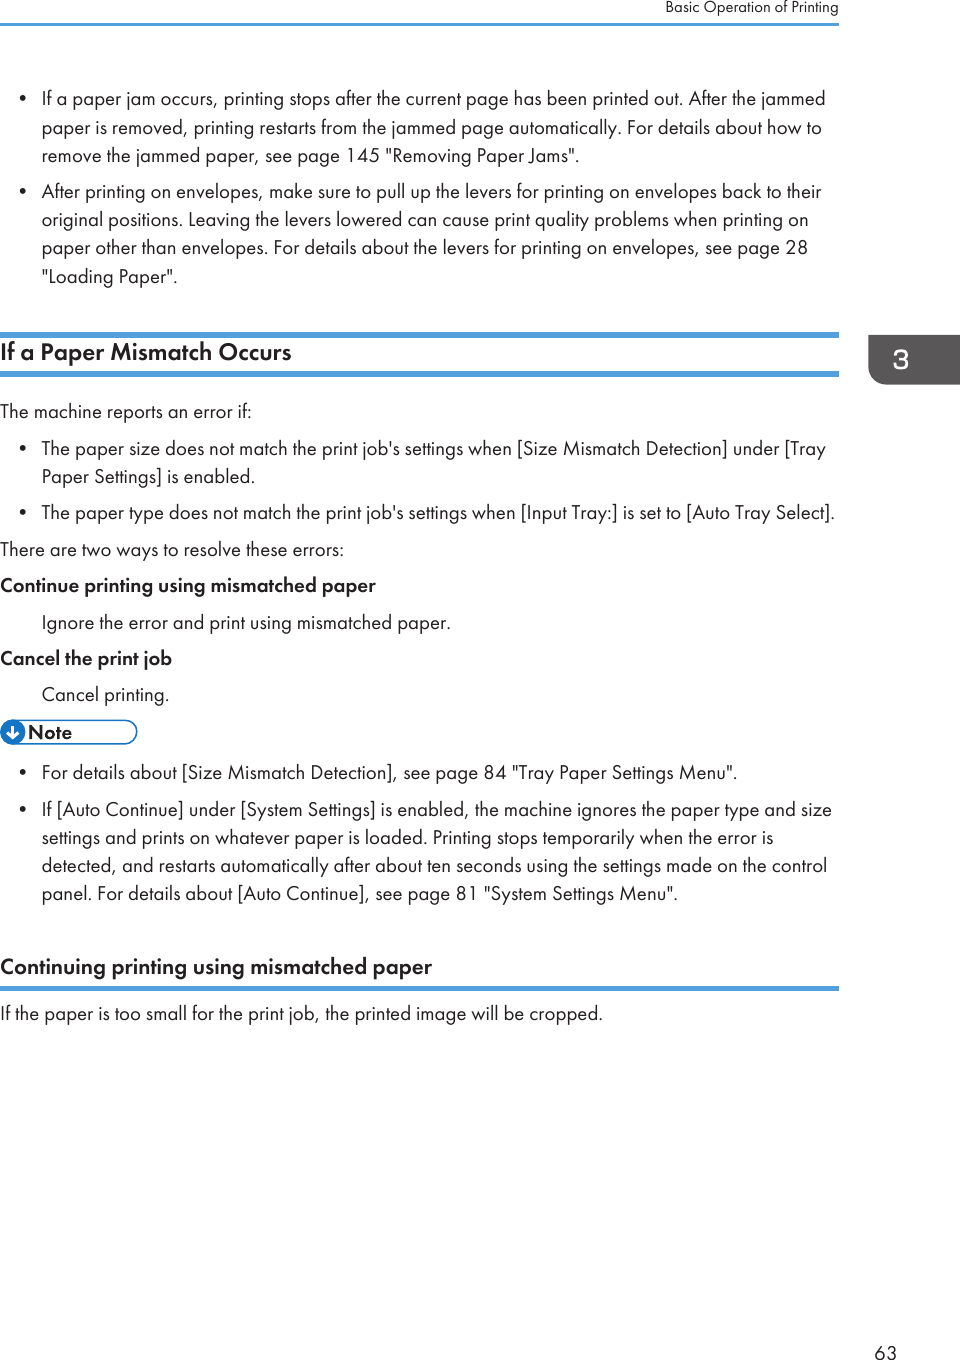 • If a paper jam occurs, printing stops after the current page has been printed out. After the jammedpaper is removed, printing restarts from the jammed page automatically. For details about how toremove the jammed paper, see page 145 &quot;Removing Paper Jams&quot;.• After printing on envelopes, make sure to pull up the levers for printing on envelopes back to theiroriginal positions. Leaving the levers lowered can cause print quality problems when printing onpaper other than envelopes. For details about the levers for printing on envelopes, see page 28&quot;Loading Paper&quot;.If a Paper Mismatch OccursThe machine reports an error if:• The paper size does not match the print job&apos;s settings when [Size Mismatch Detection] under [TrayPaper Settings] is enabled.• The paper type does not match the print job&apos;s settings when [Input Tray:] is set to [Auto Tray Select].There are two ways to resolve these errors:Continue printing using mismatched paperIgnore the error and print using mismatched paper.Cancel the print jobCancel printing.• For details about [Size Mismatch Detection], see page 84 &quot;Tray Paper Settings Menu&quot;.• If [Auto Continue] under [System Settings] is enabled, the machine ignores the paper type and sizesettings and prints on whatever paper is loaded. Printing stops temporarily when the error isdetected, and restarts automatically after about ten seconds using the settings made on the controlpanel. For details about [Auto Continue], see page 81 &quot;System Settings Menu&quot;.Continuing printing using mismatched paperIf the paper is too small for the print job, the printed image will be cropped.Basic Operation of Printing63